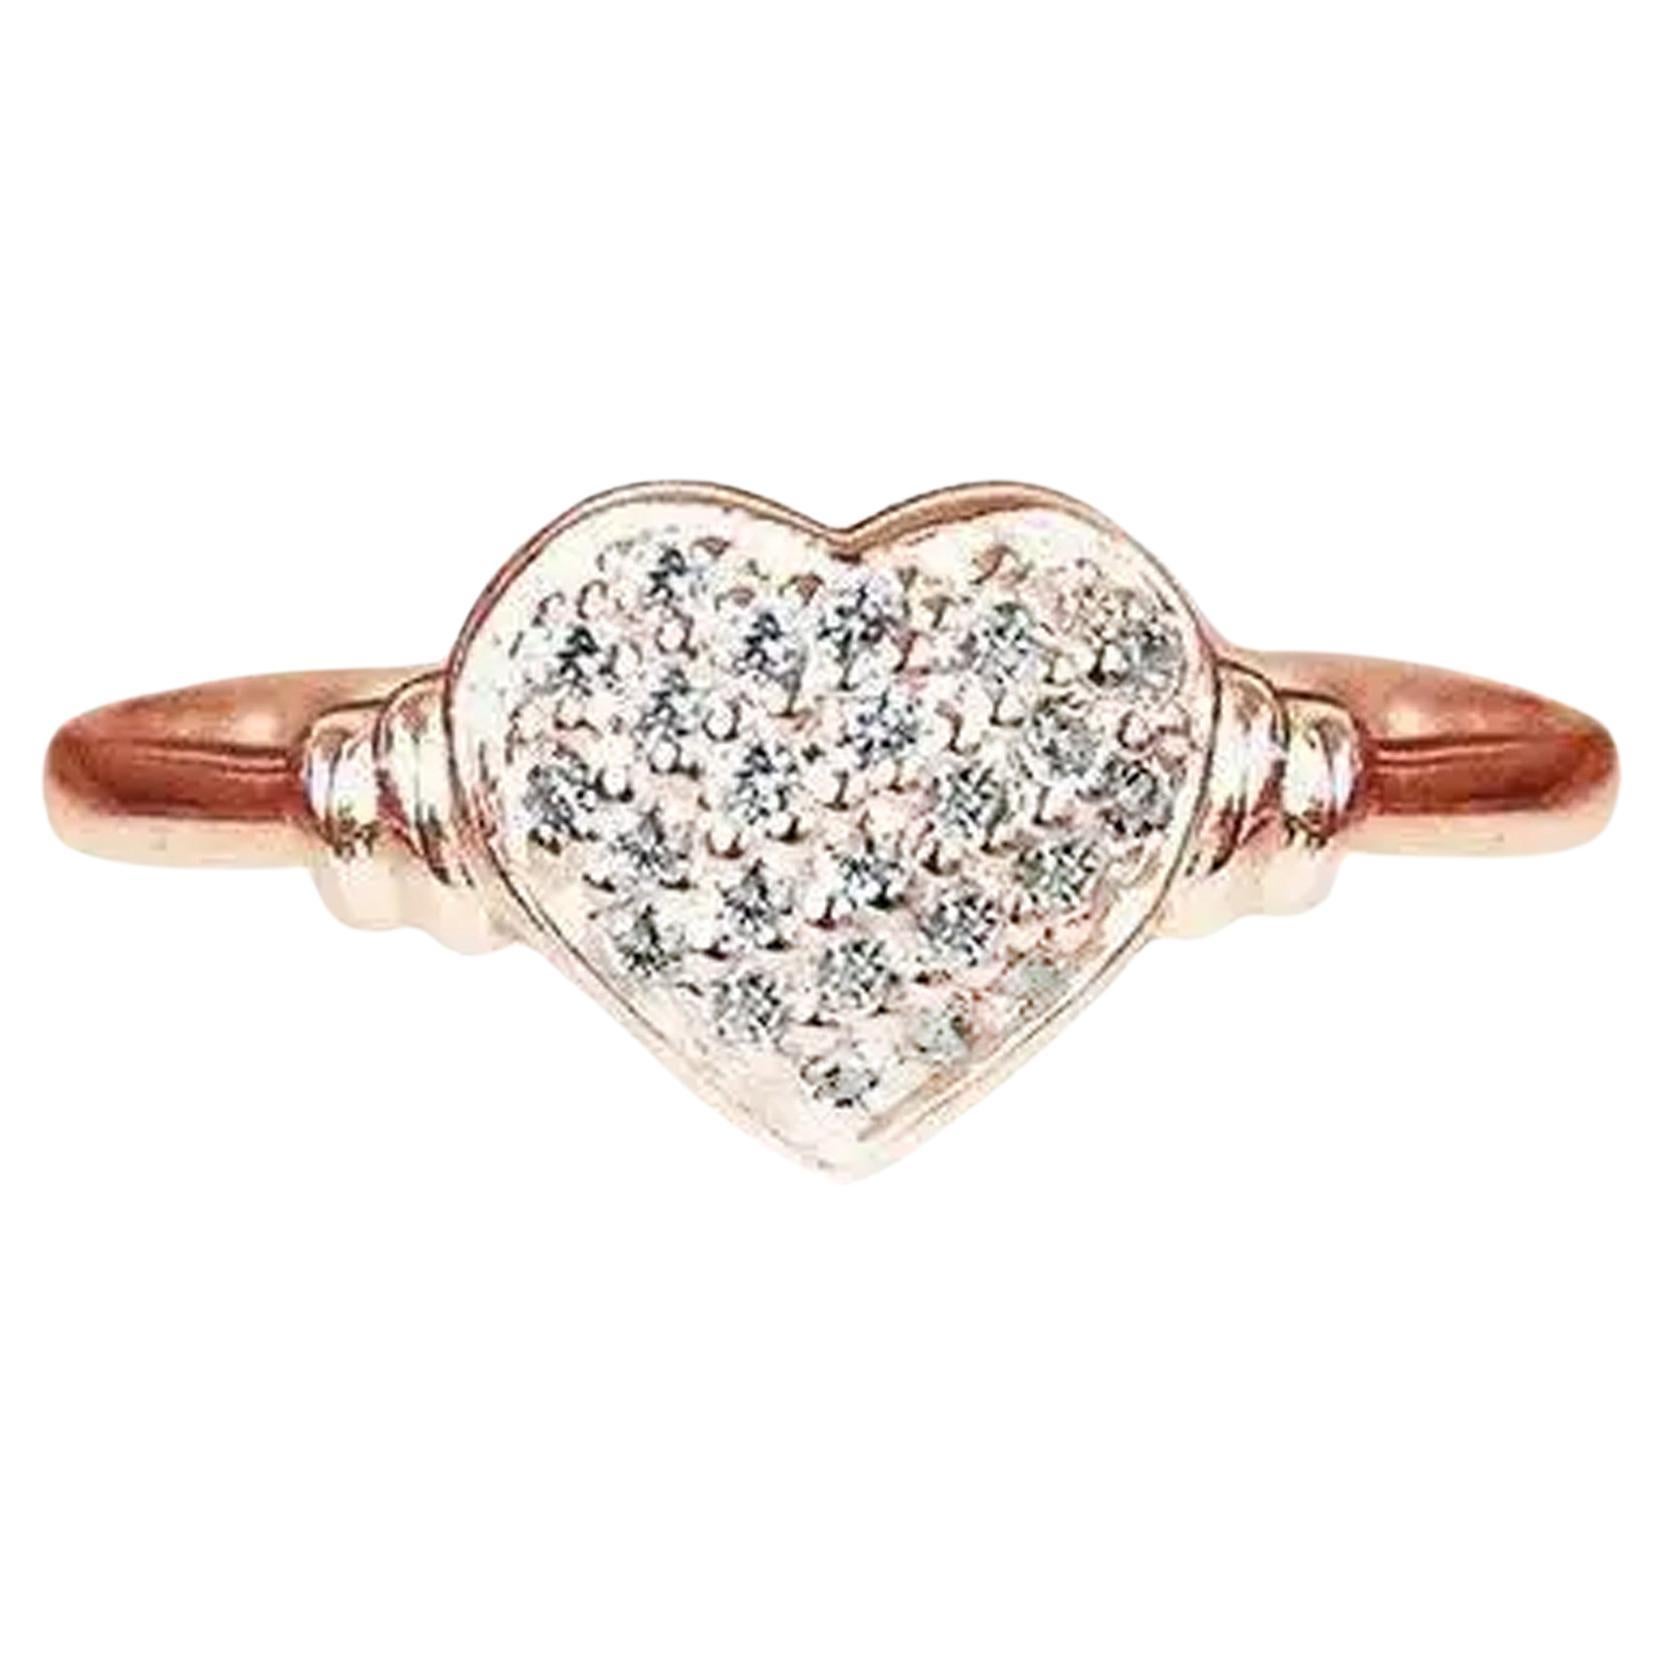 18k Gold Diamond Heart Ring Pave Heart Ring Engagement Ring